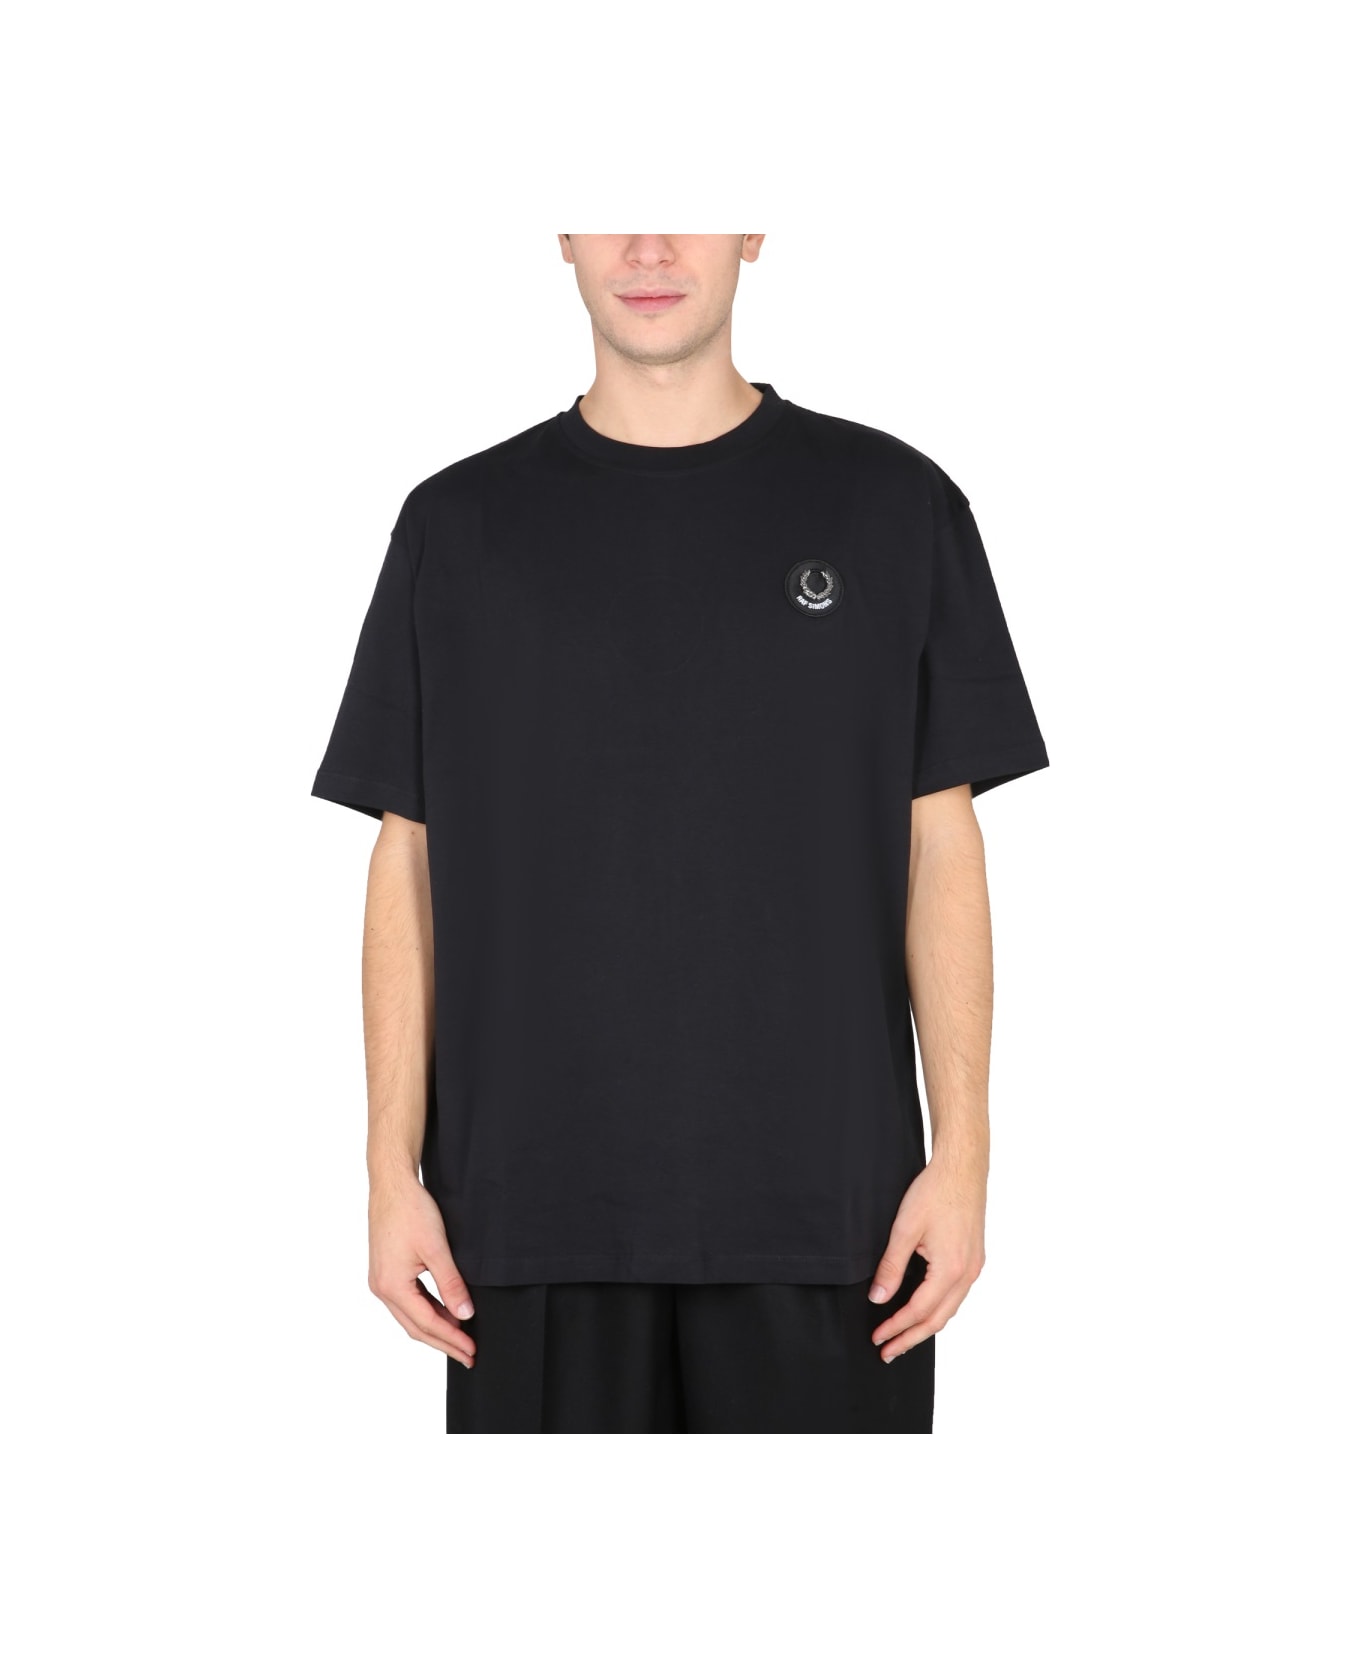 Fred Perry by Raf Simons Oversized Logo T-shirt - BLACK シャツ